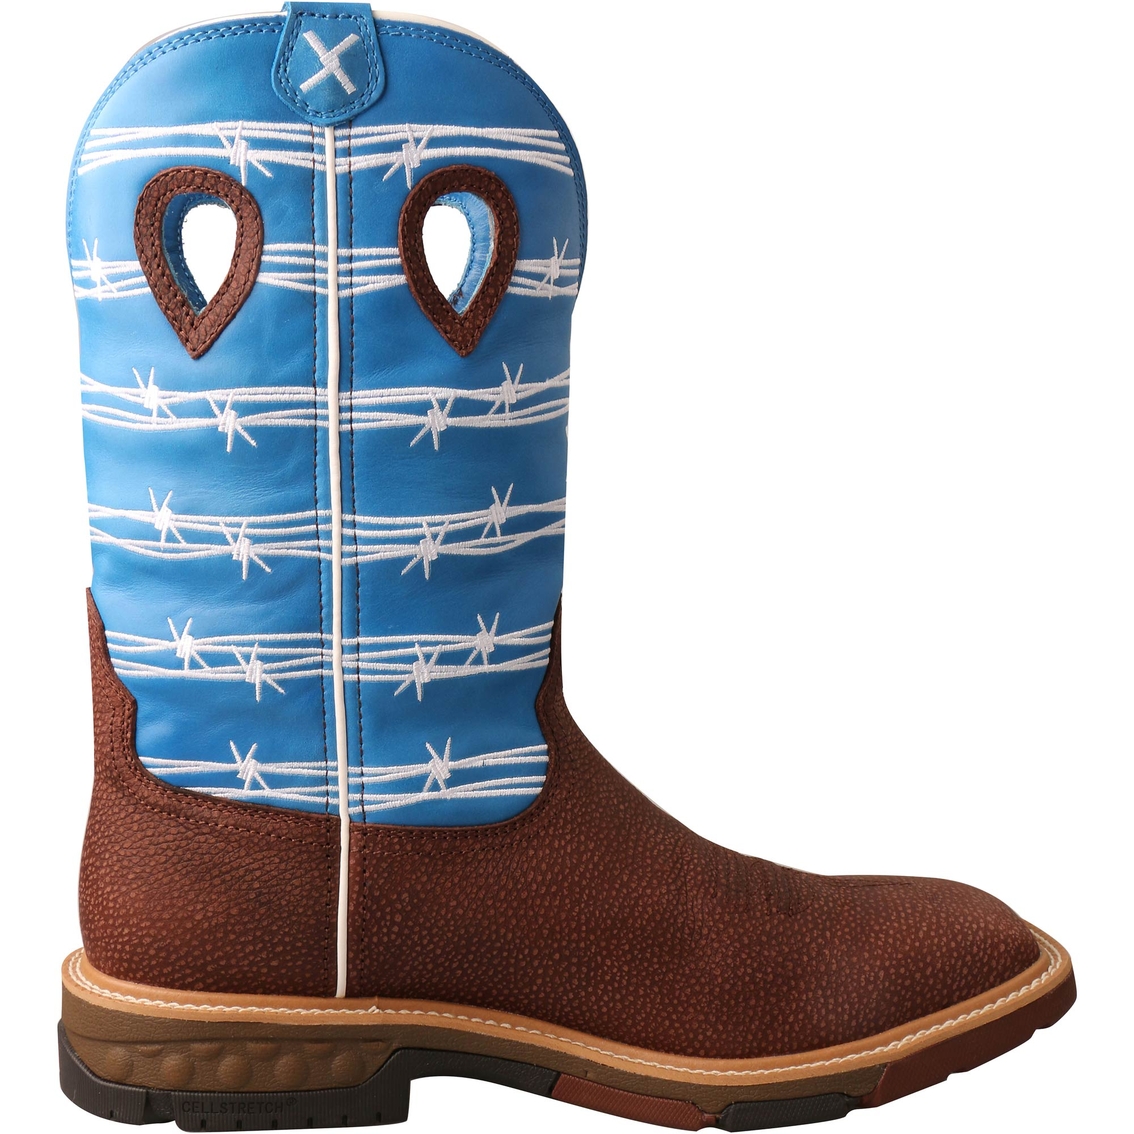 Twisted X 12 in. Alloy Toe Western Work Boots with Cell Stretch - Image 2 of 6